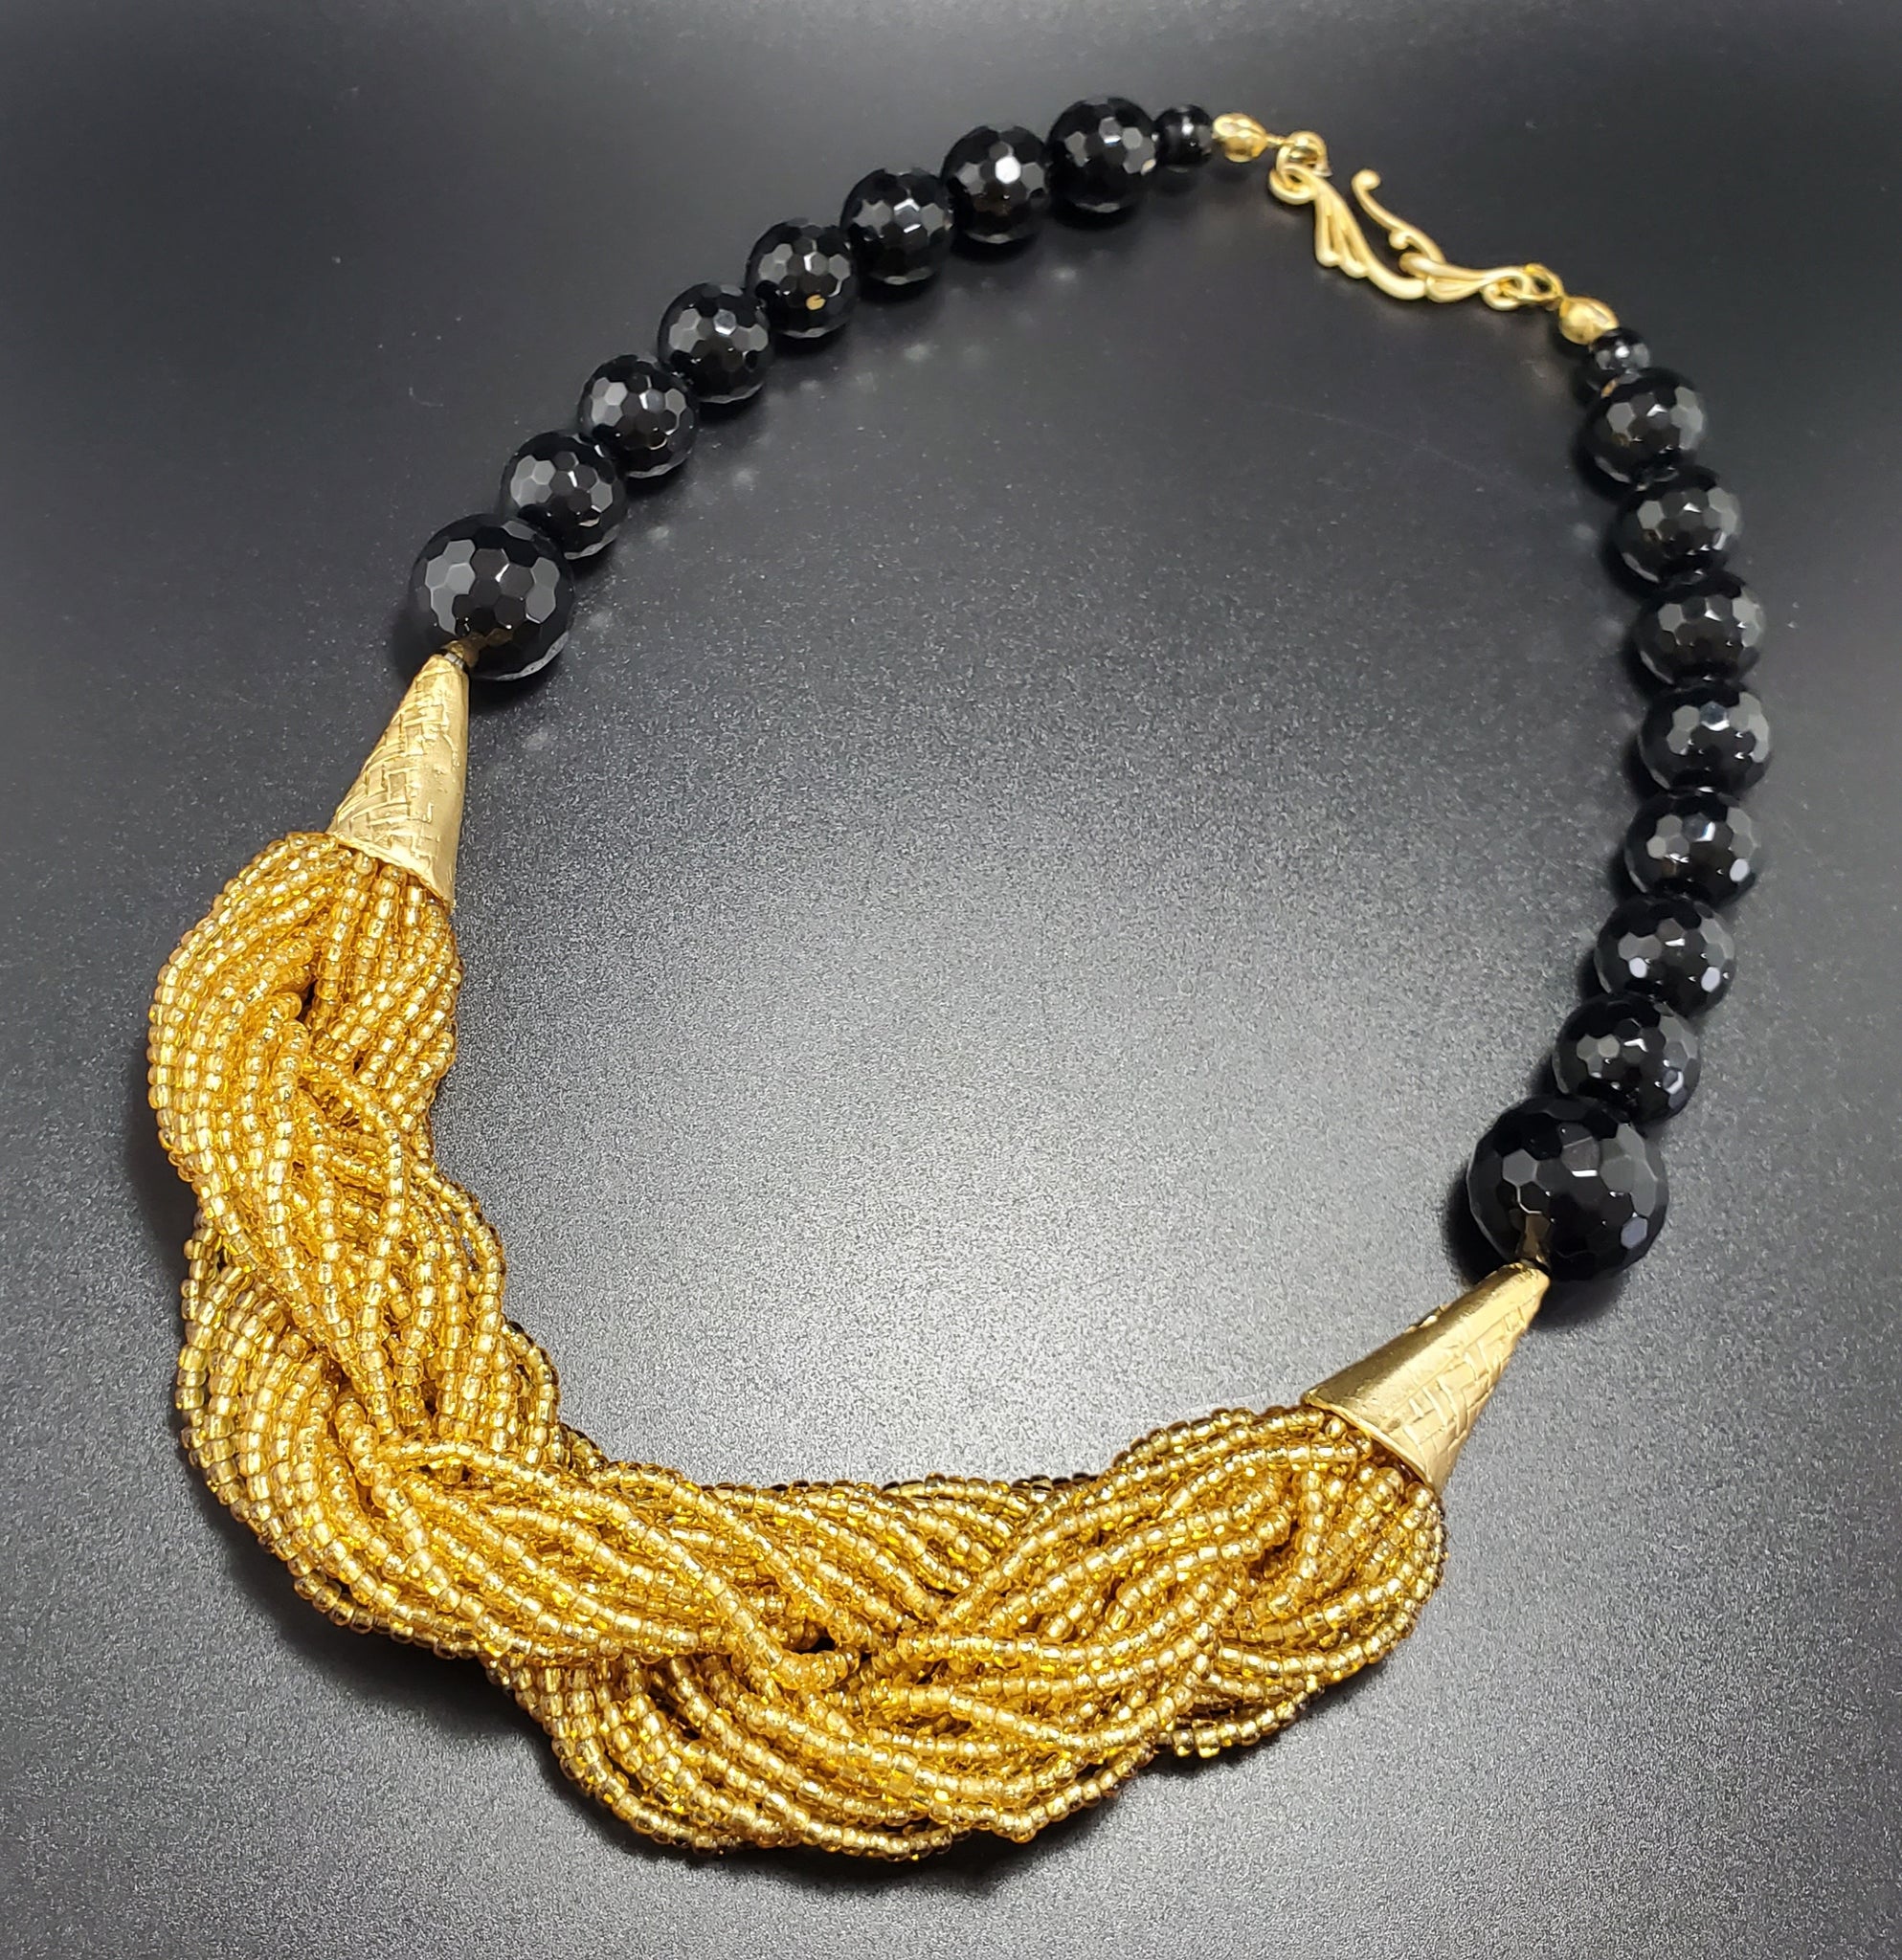 Black Onyx Beads, Gold Venetian Seed Beads, 22K Gold Plated Brass and Brass, Twisted Strand Necklace